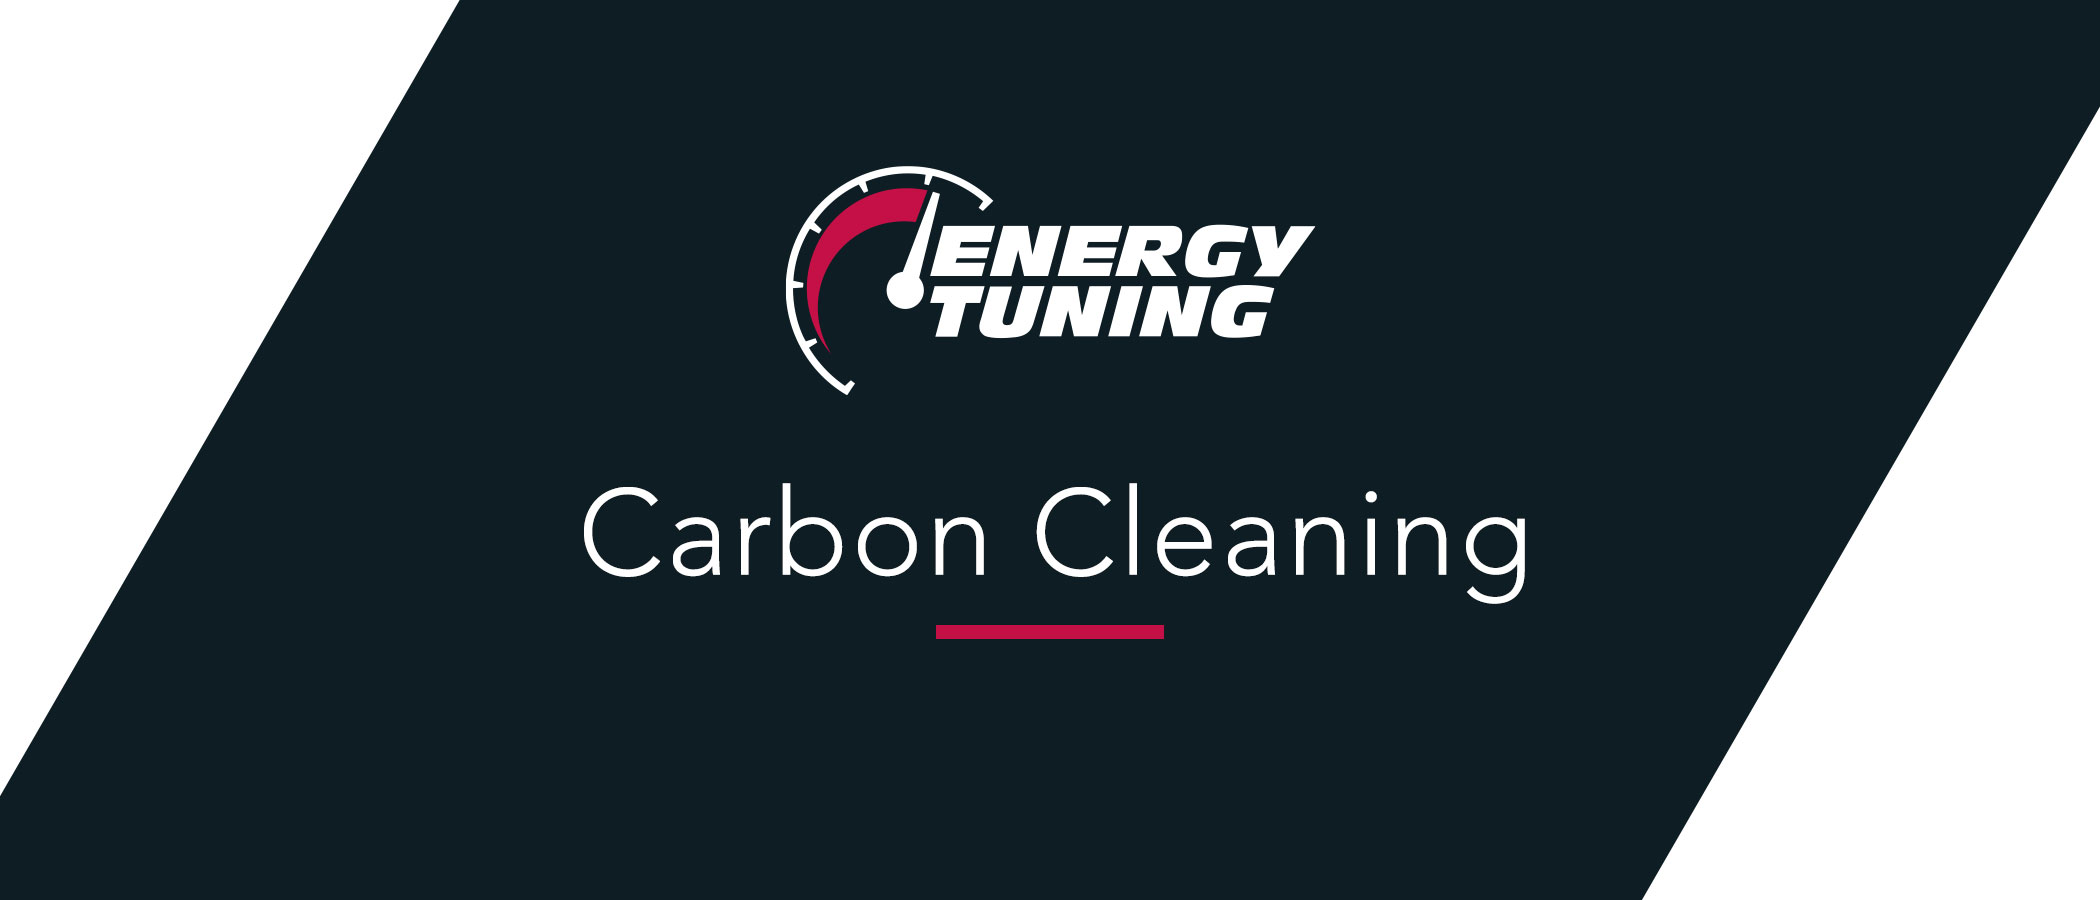 Carbon Cleaning